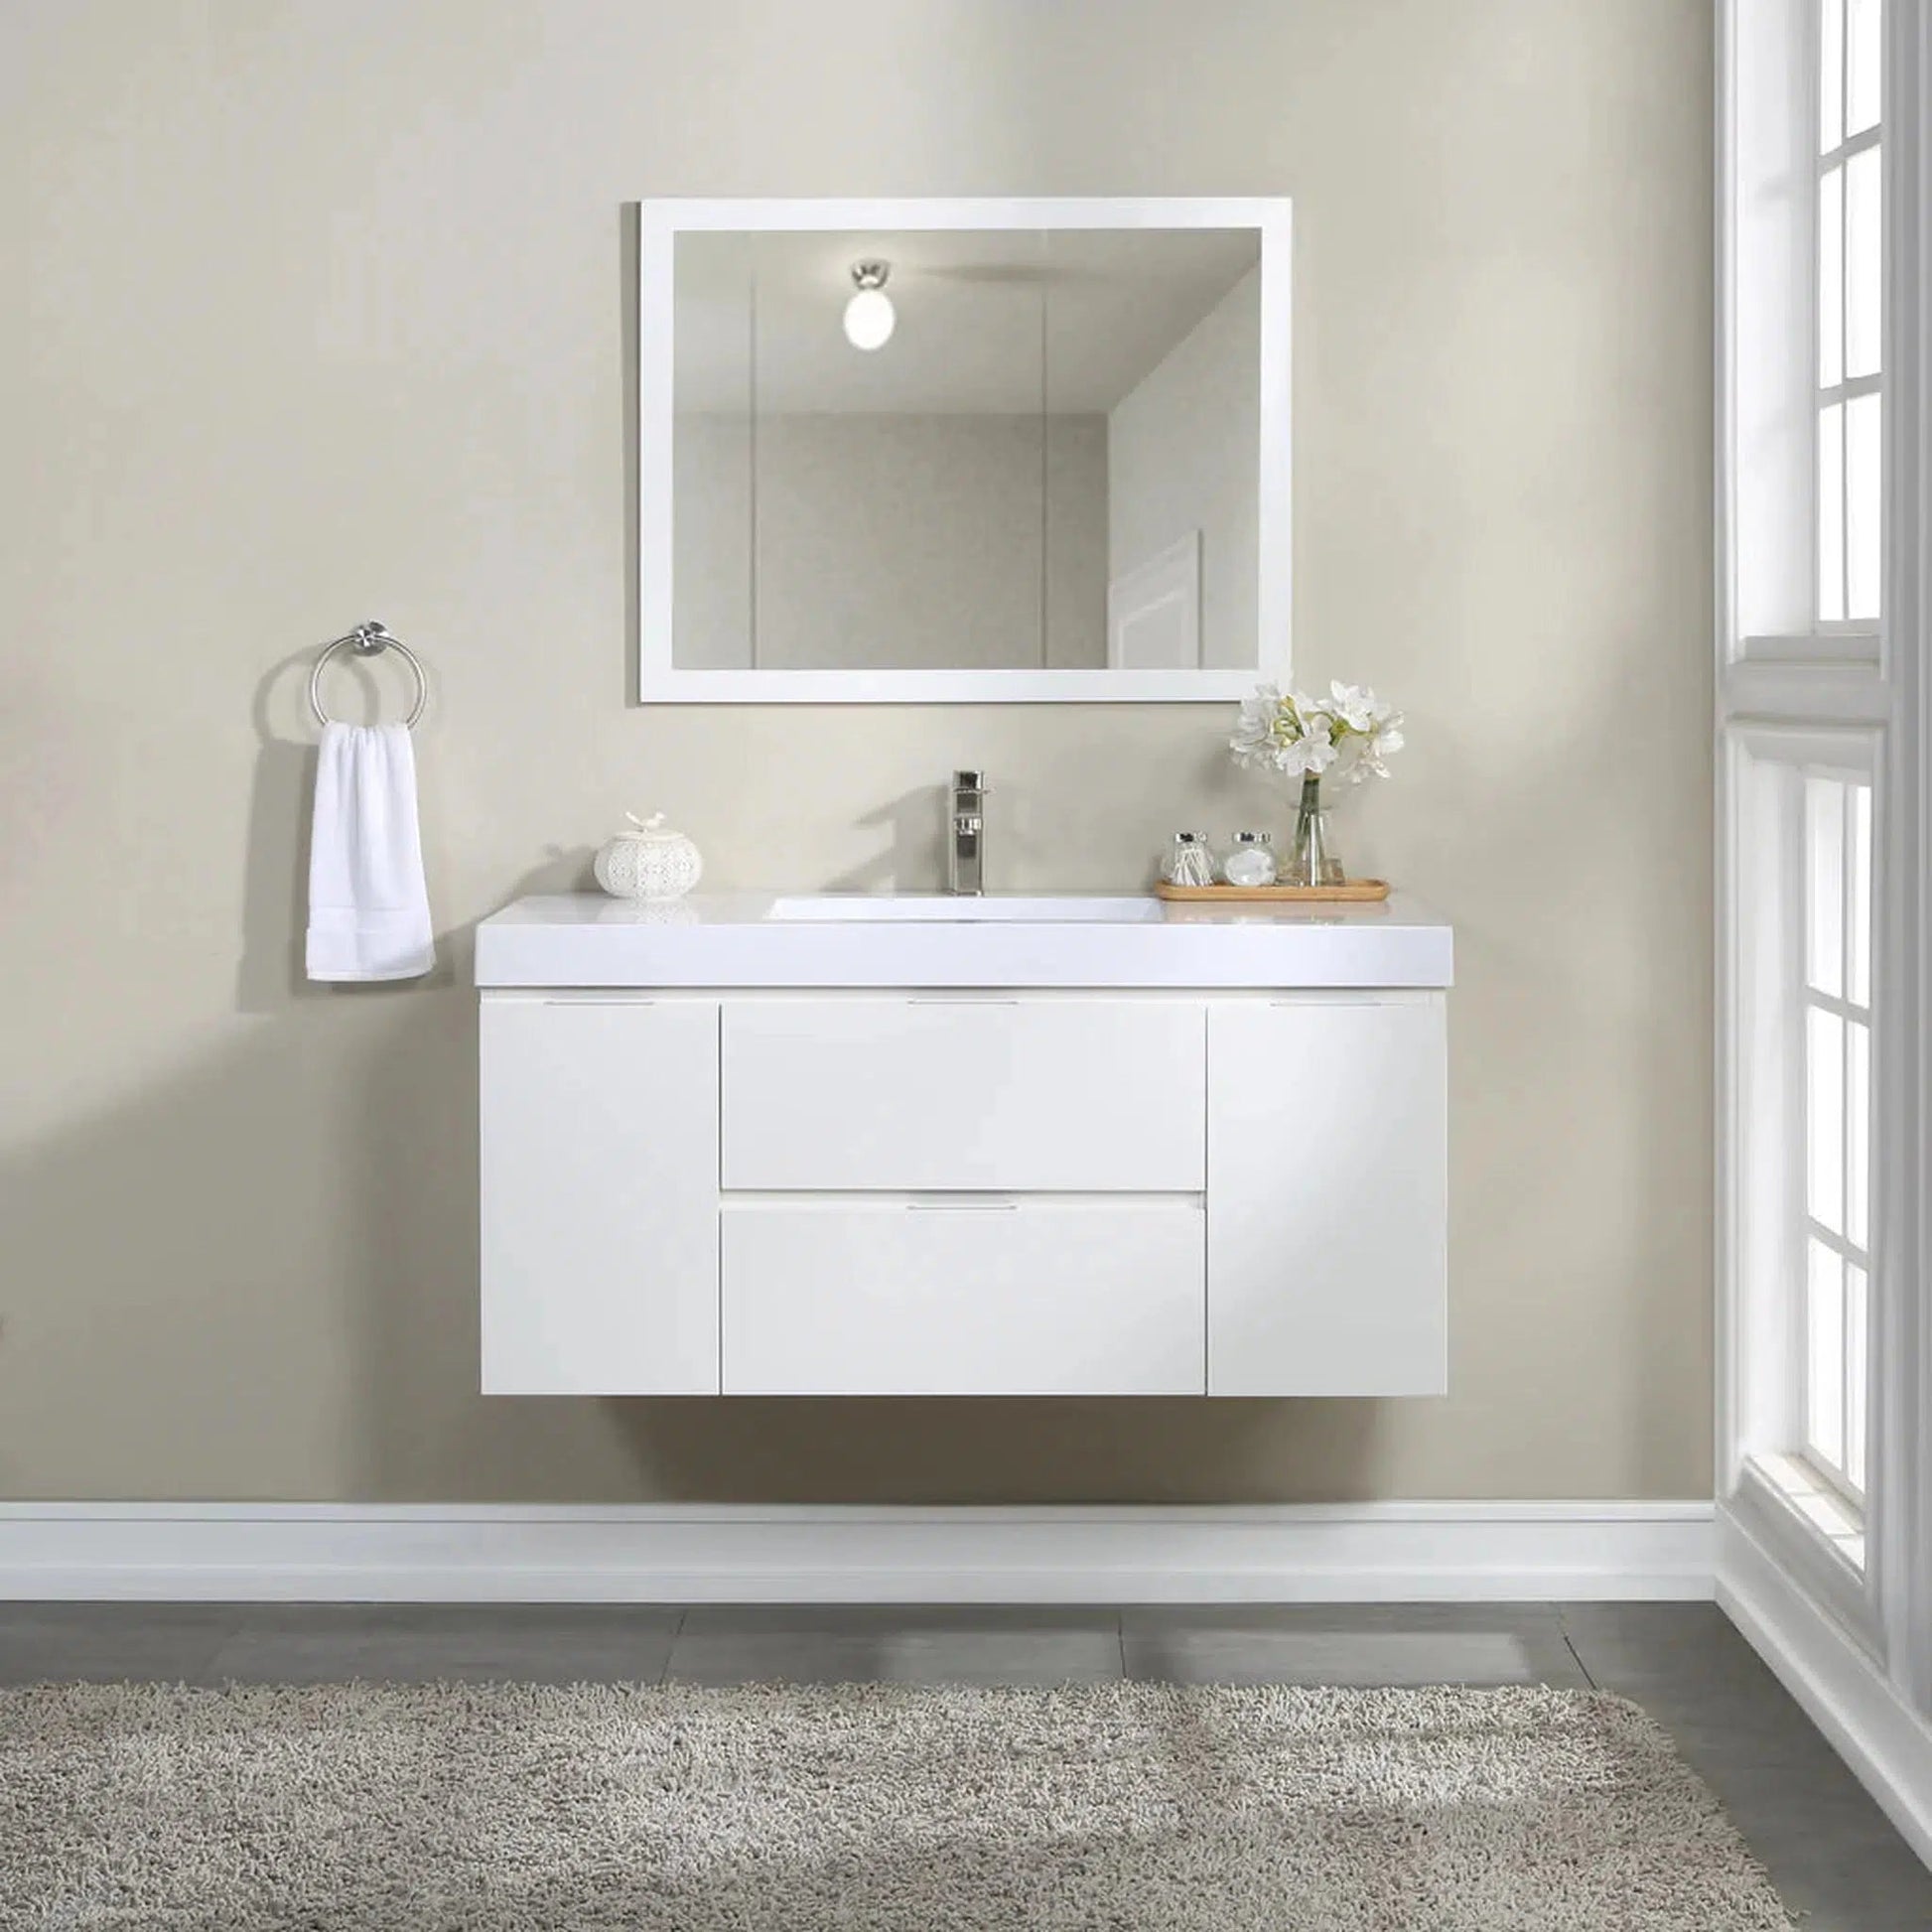 Stufurhome Helena 49" Gloss White Wall Mounted Single Sink Bathroom Vanity with 2 Drawers, 2 Doors and One Pre-drilled Faucet hole